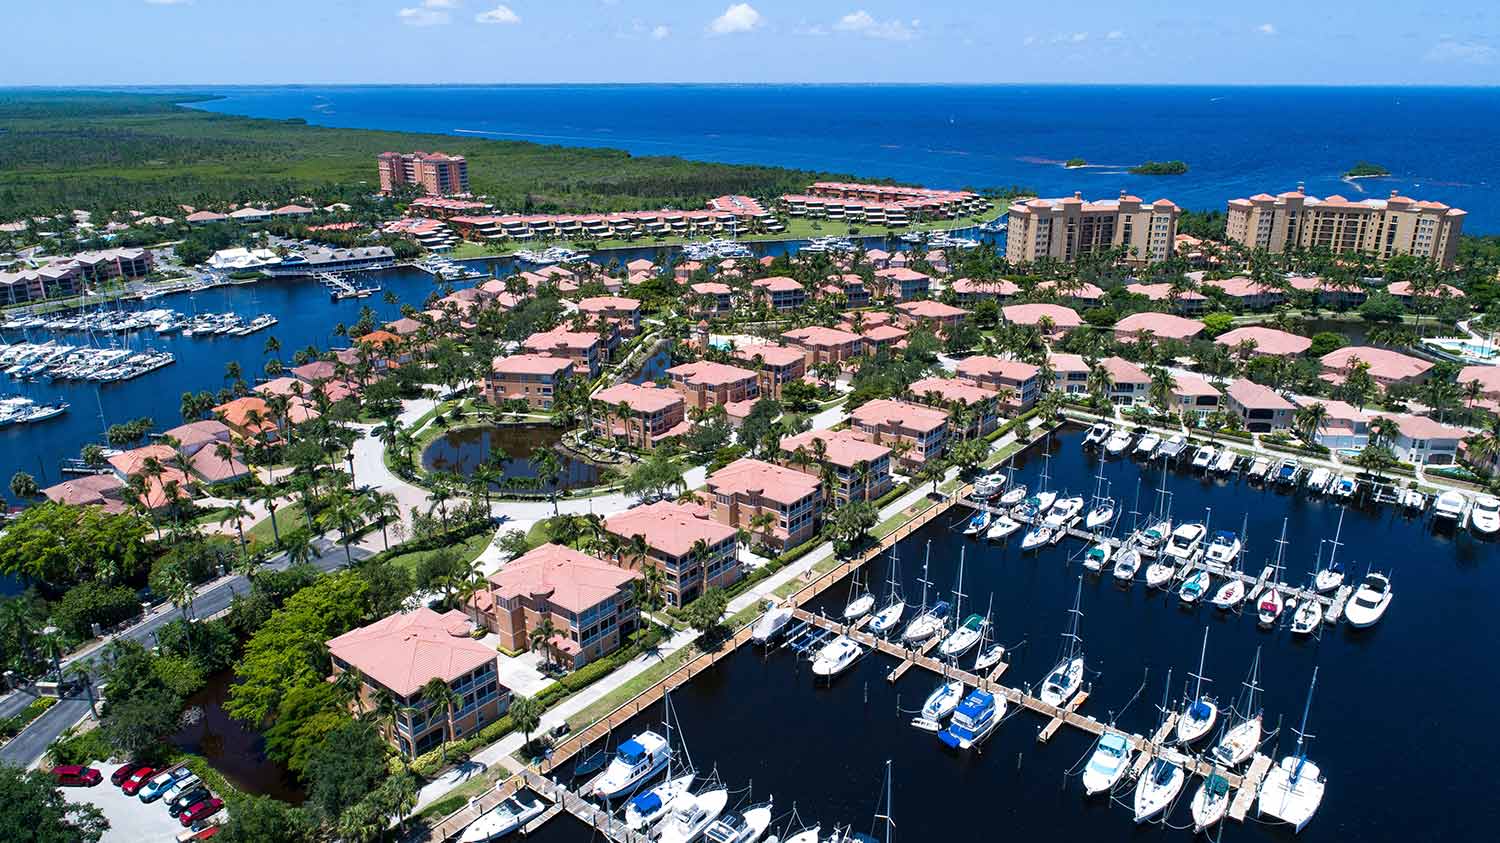 Aerial image of boat dock and residential area